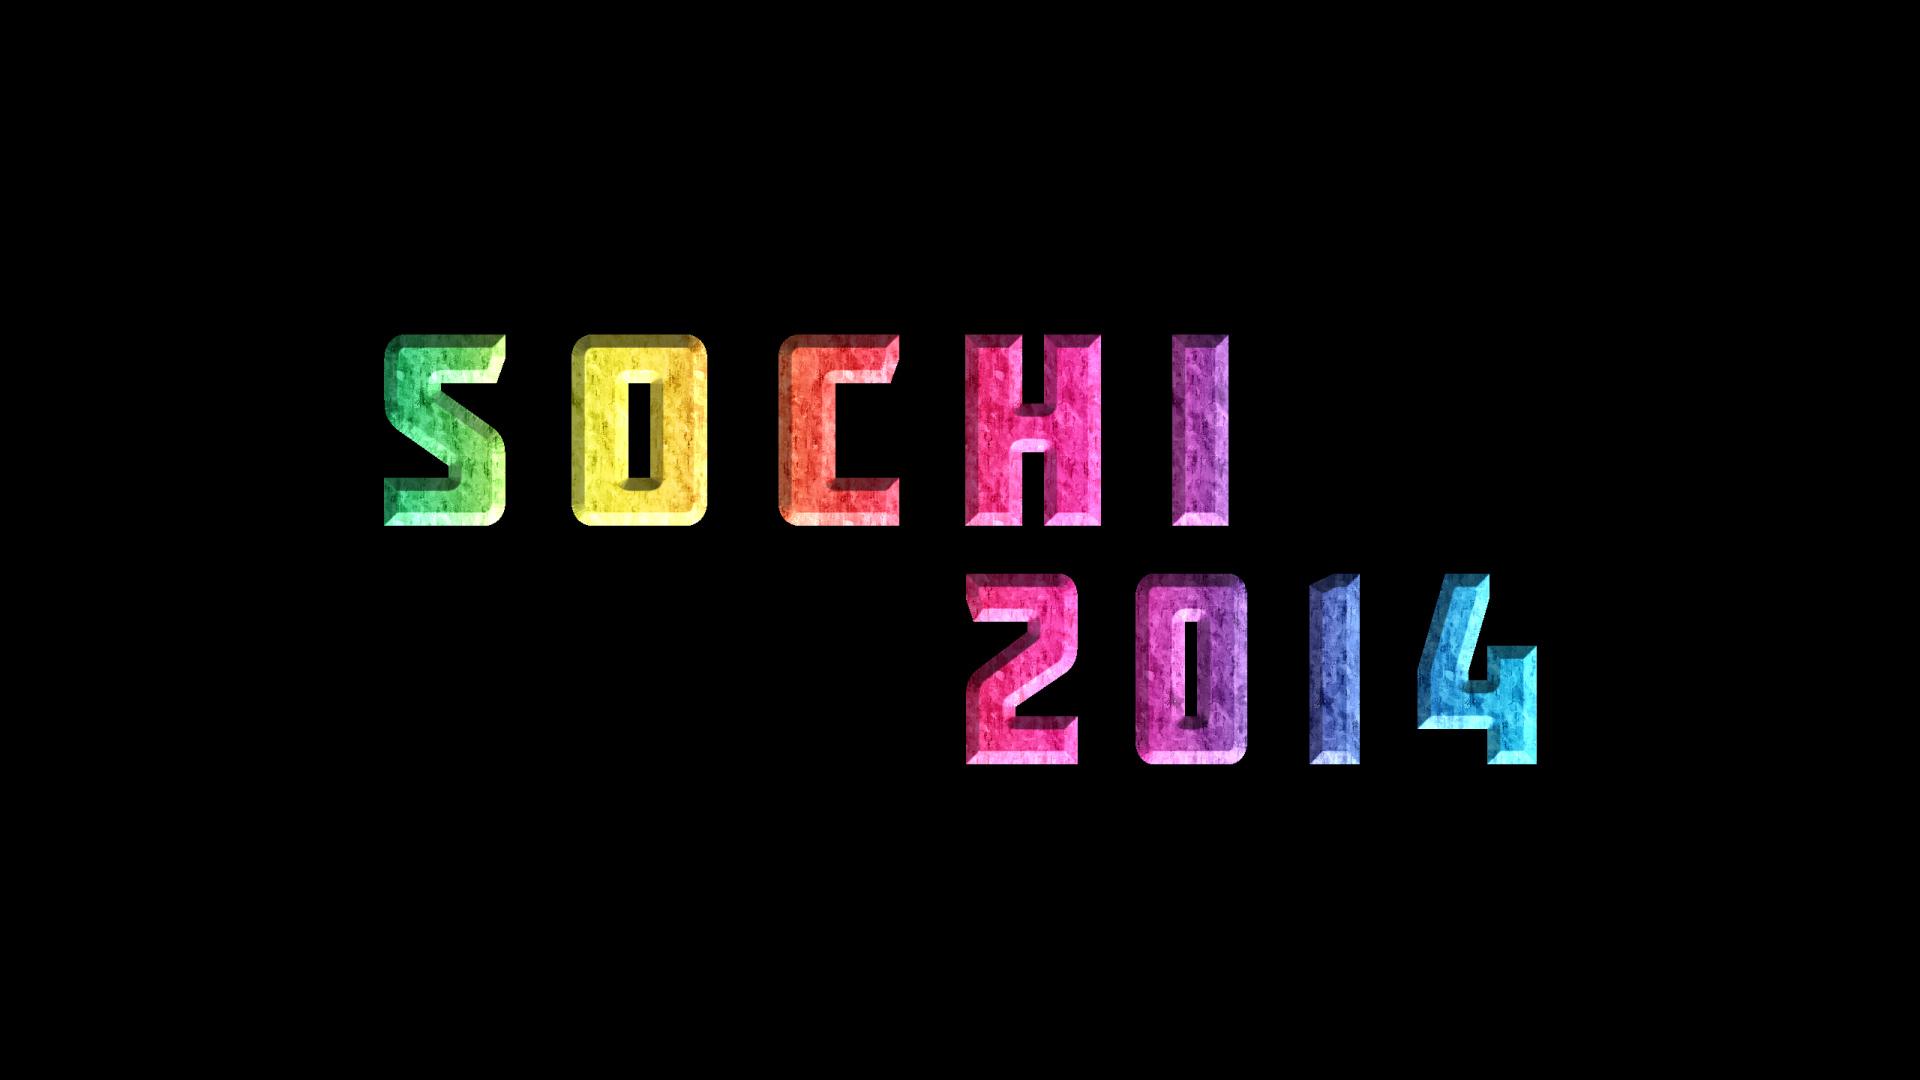 Winter Olimpic Games Sochi 2014 wallpapers HD quality